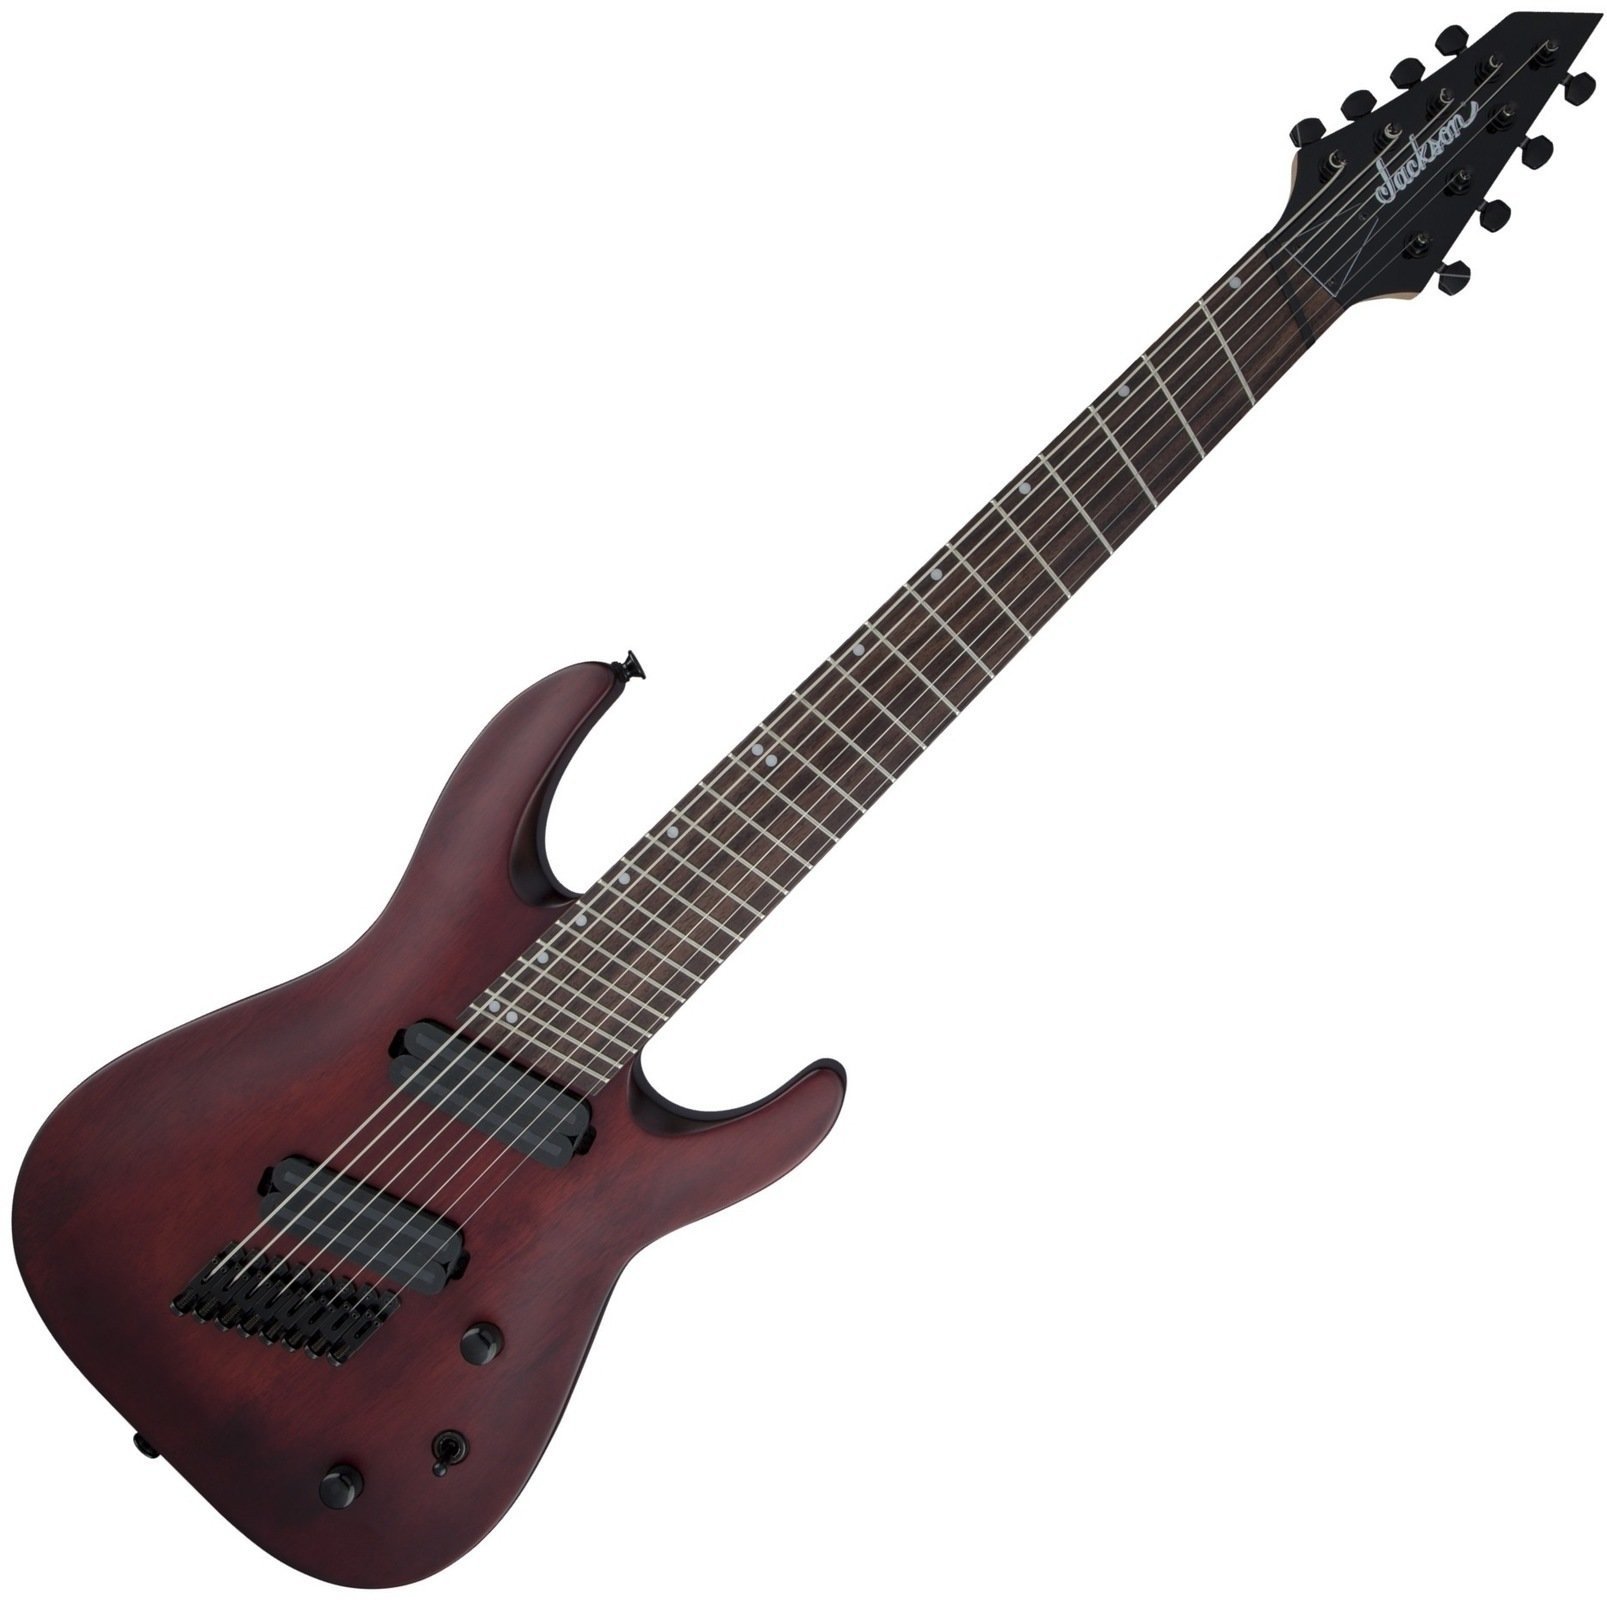 8-string electric guitar Jackson X Series Dinky TM Arch Top DKAF8 MS RW Stained Mahogany